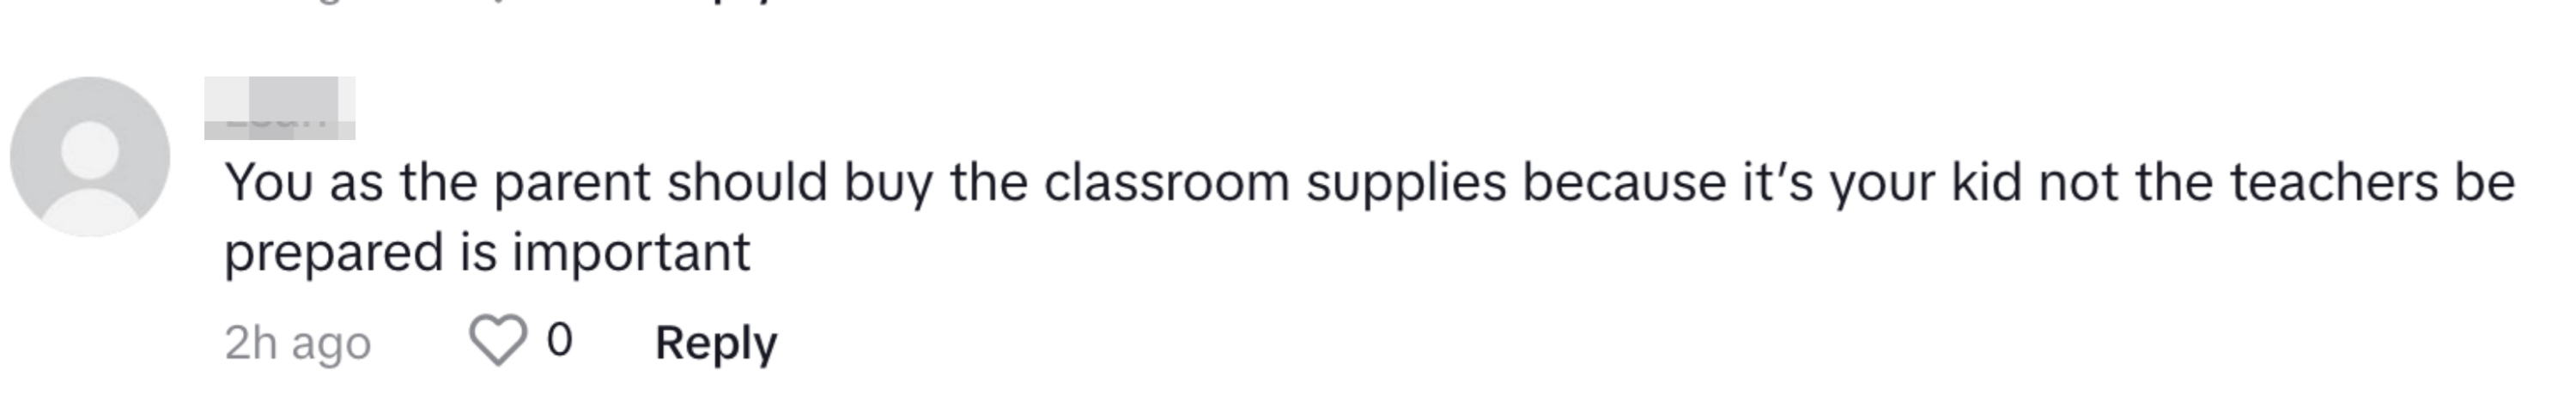 &quot;You as the parent buy the classroom supplies because it&#x27;s your kid, not the teacher&#x27;s. Being prepared is important.&quot;